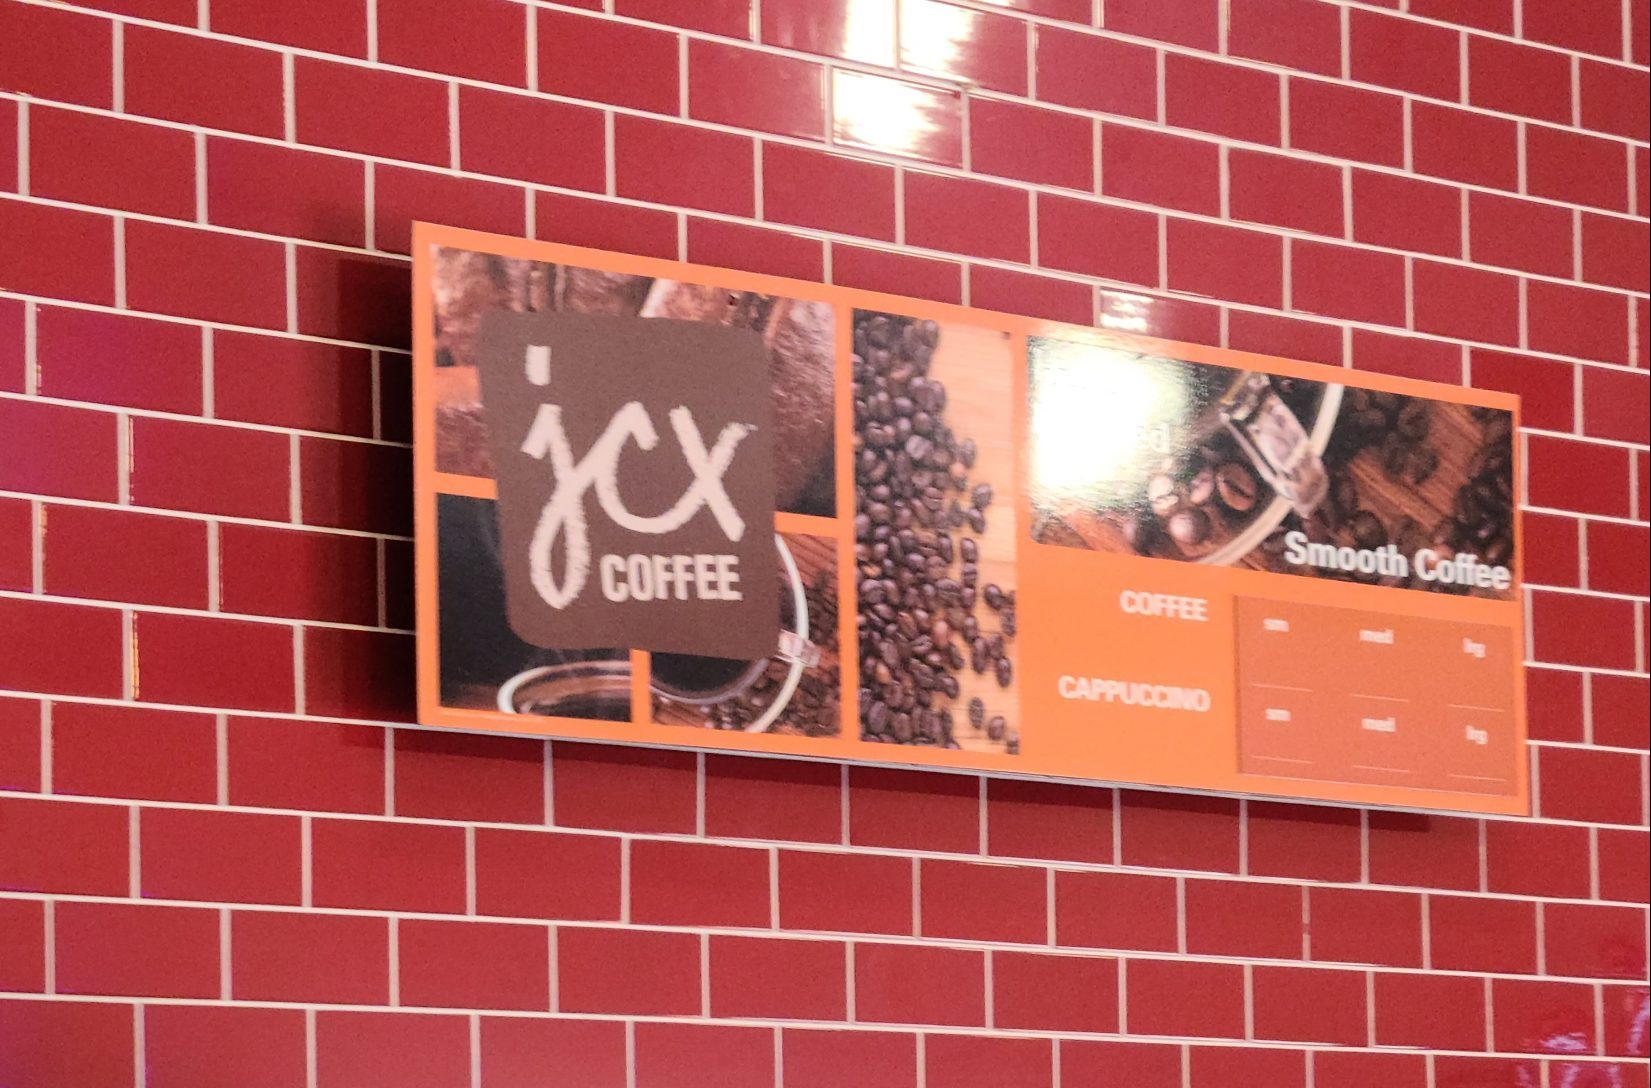 We installed this menu sign for Bewley's Java City establishment in Santa Monica. With this, customers can see the flavorful varieties of coffee the establishment is offering.